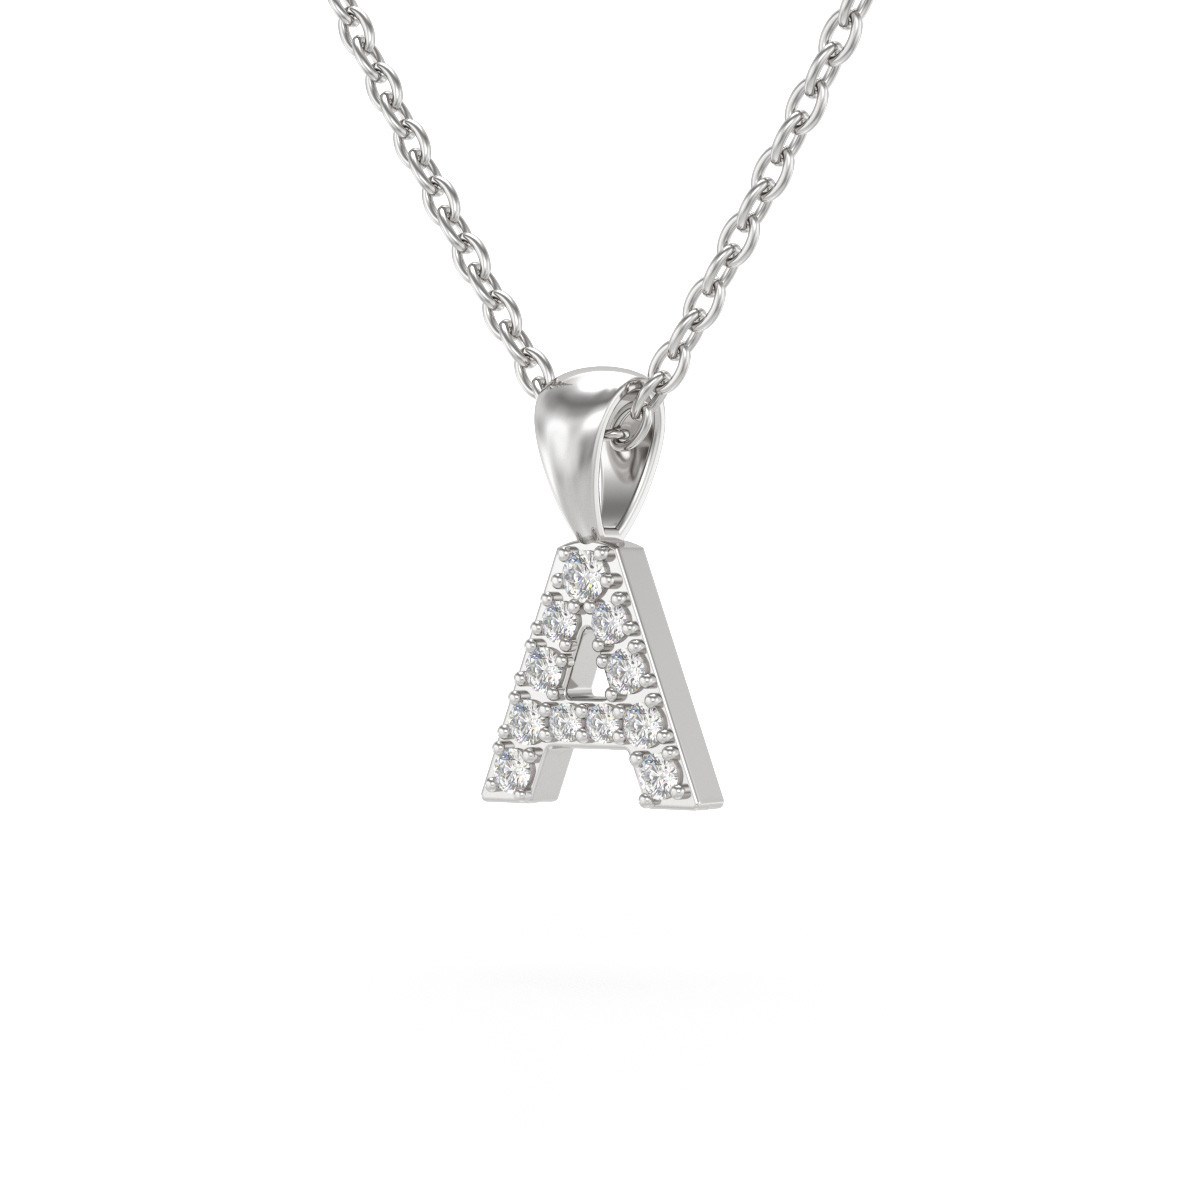 Collier Pendentif ADEN Lettre A Or 750 Blanc Diamant Chaine Or 750 incluse 0.72grs - vue 3